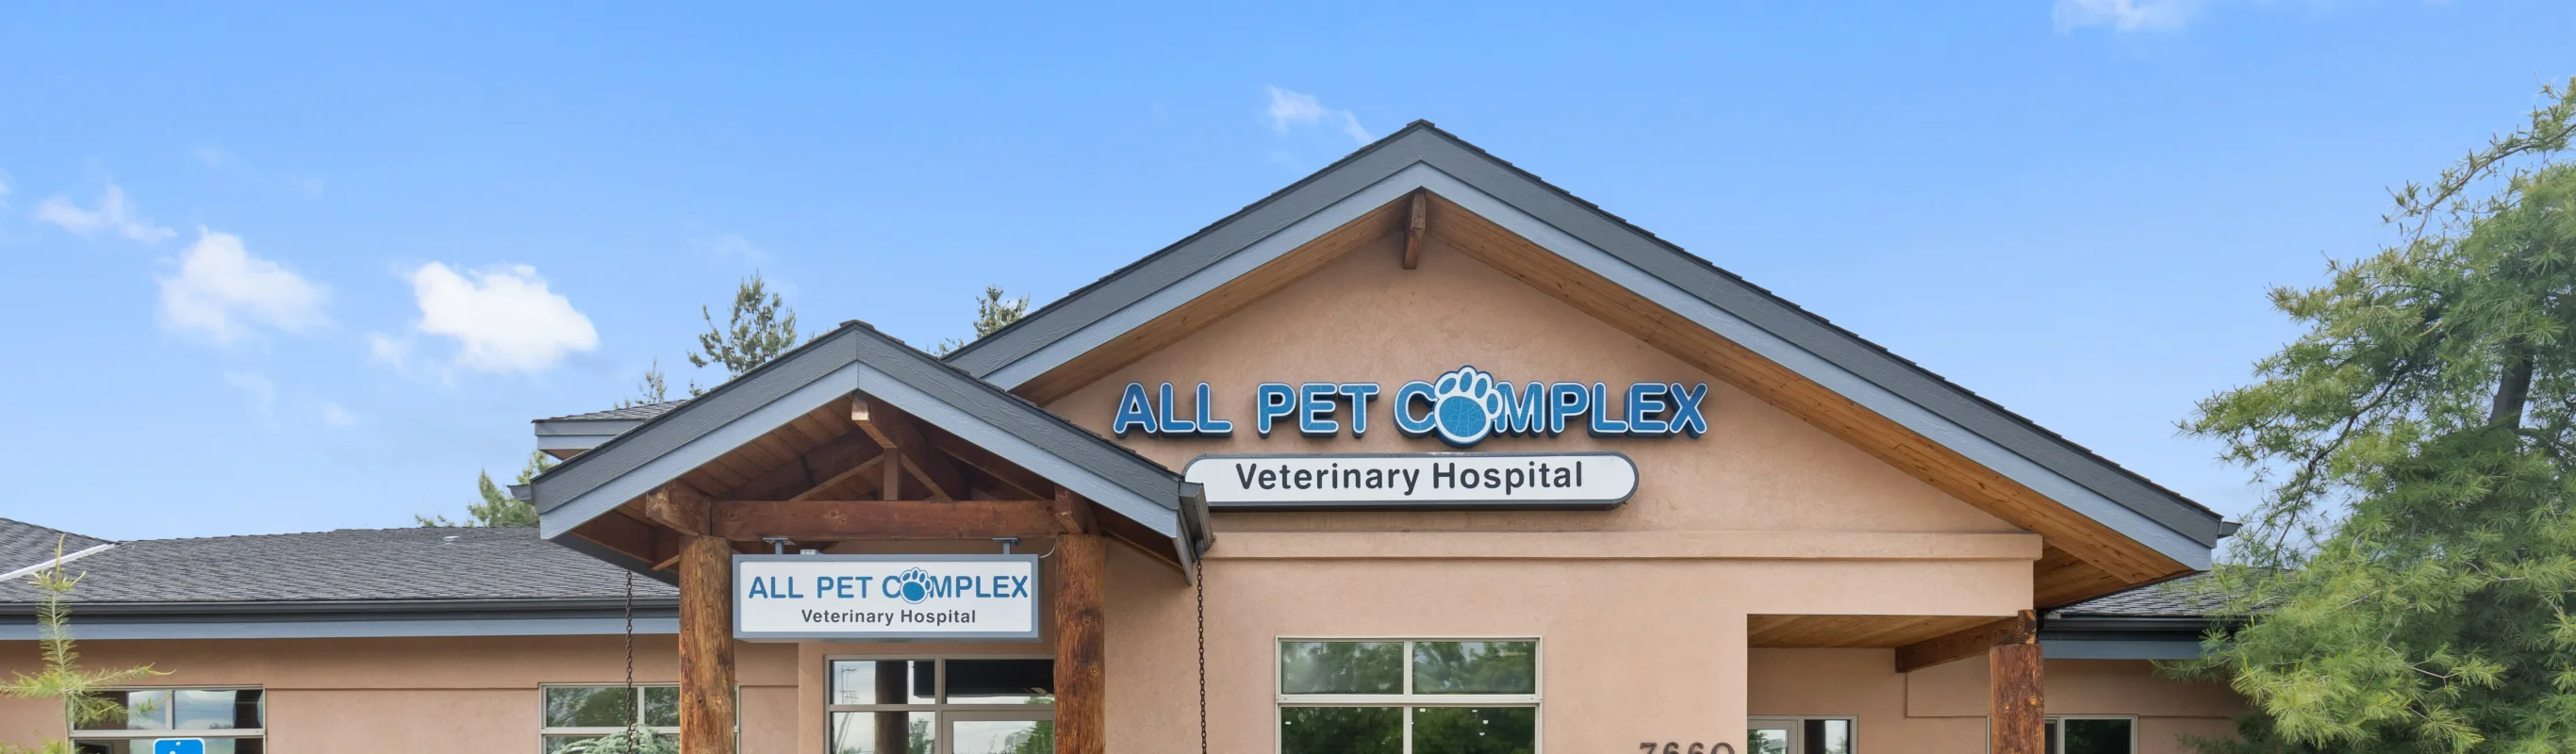 Front exterior view of All Pet Complex Veterinary Hospital